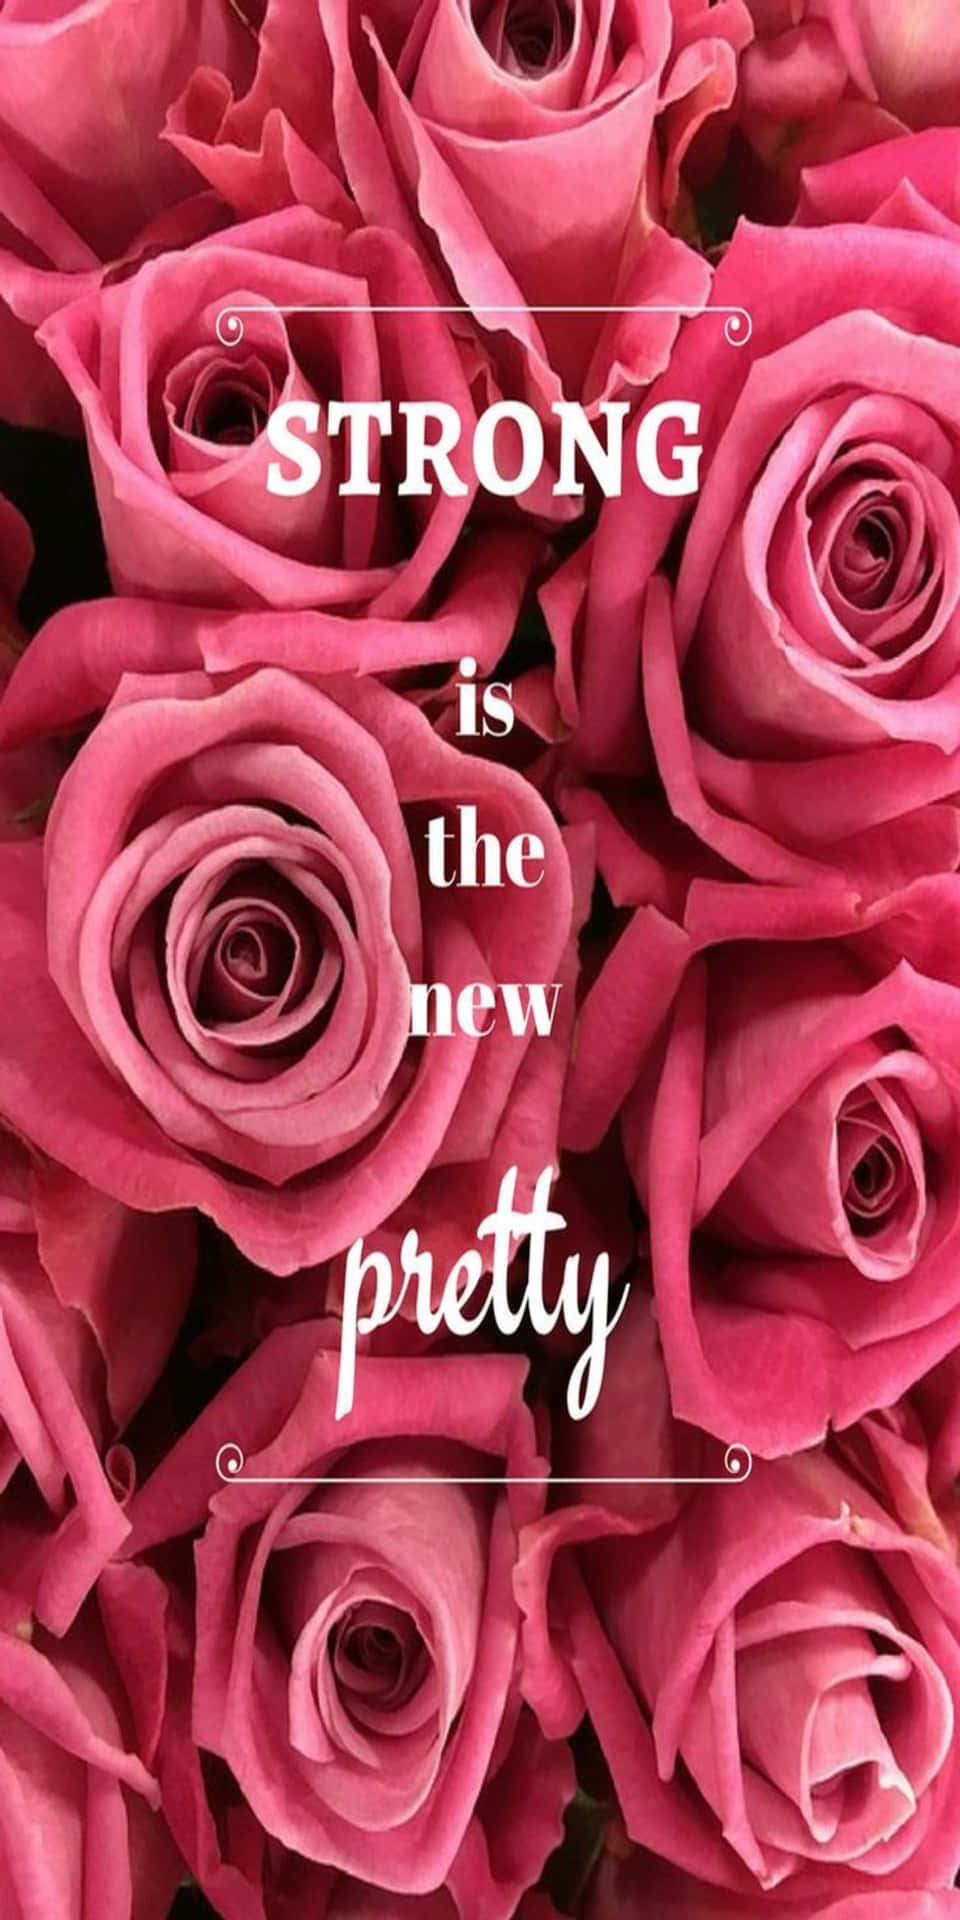 Pixel 3 Strong New Pretty Roses Background